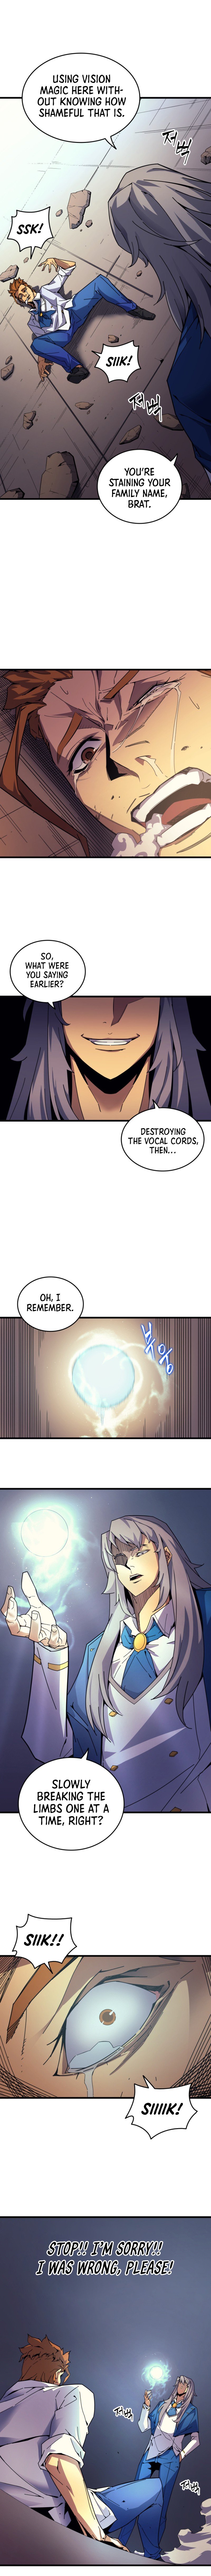 the-great-mage-returns-after-4000-years-chap-8-3